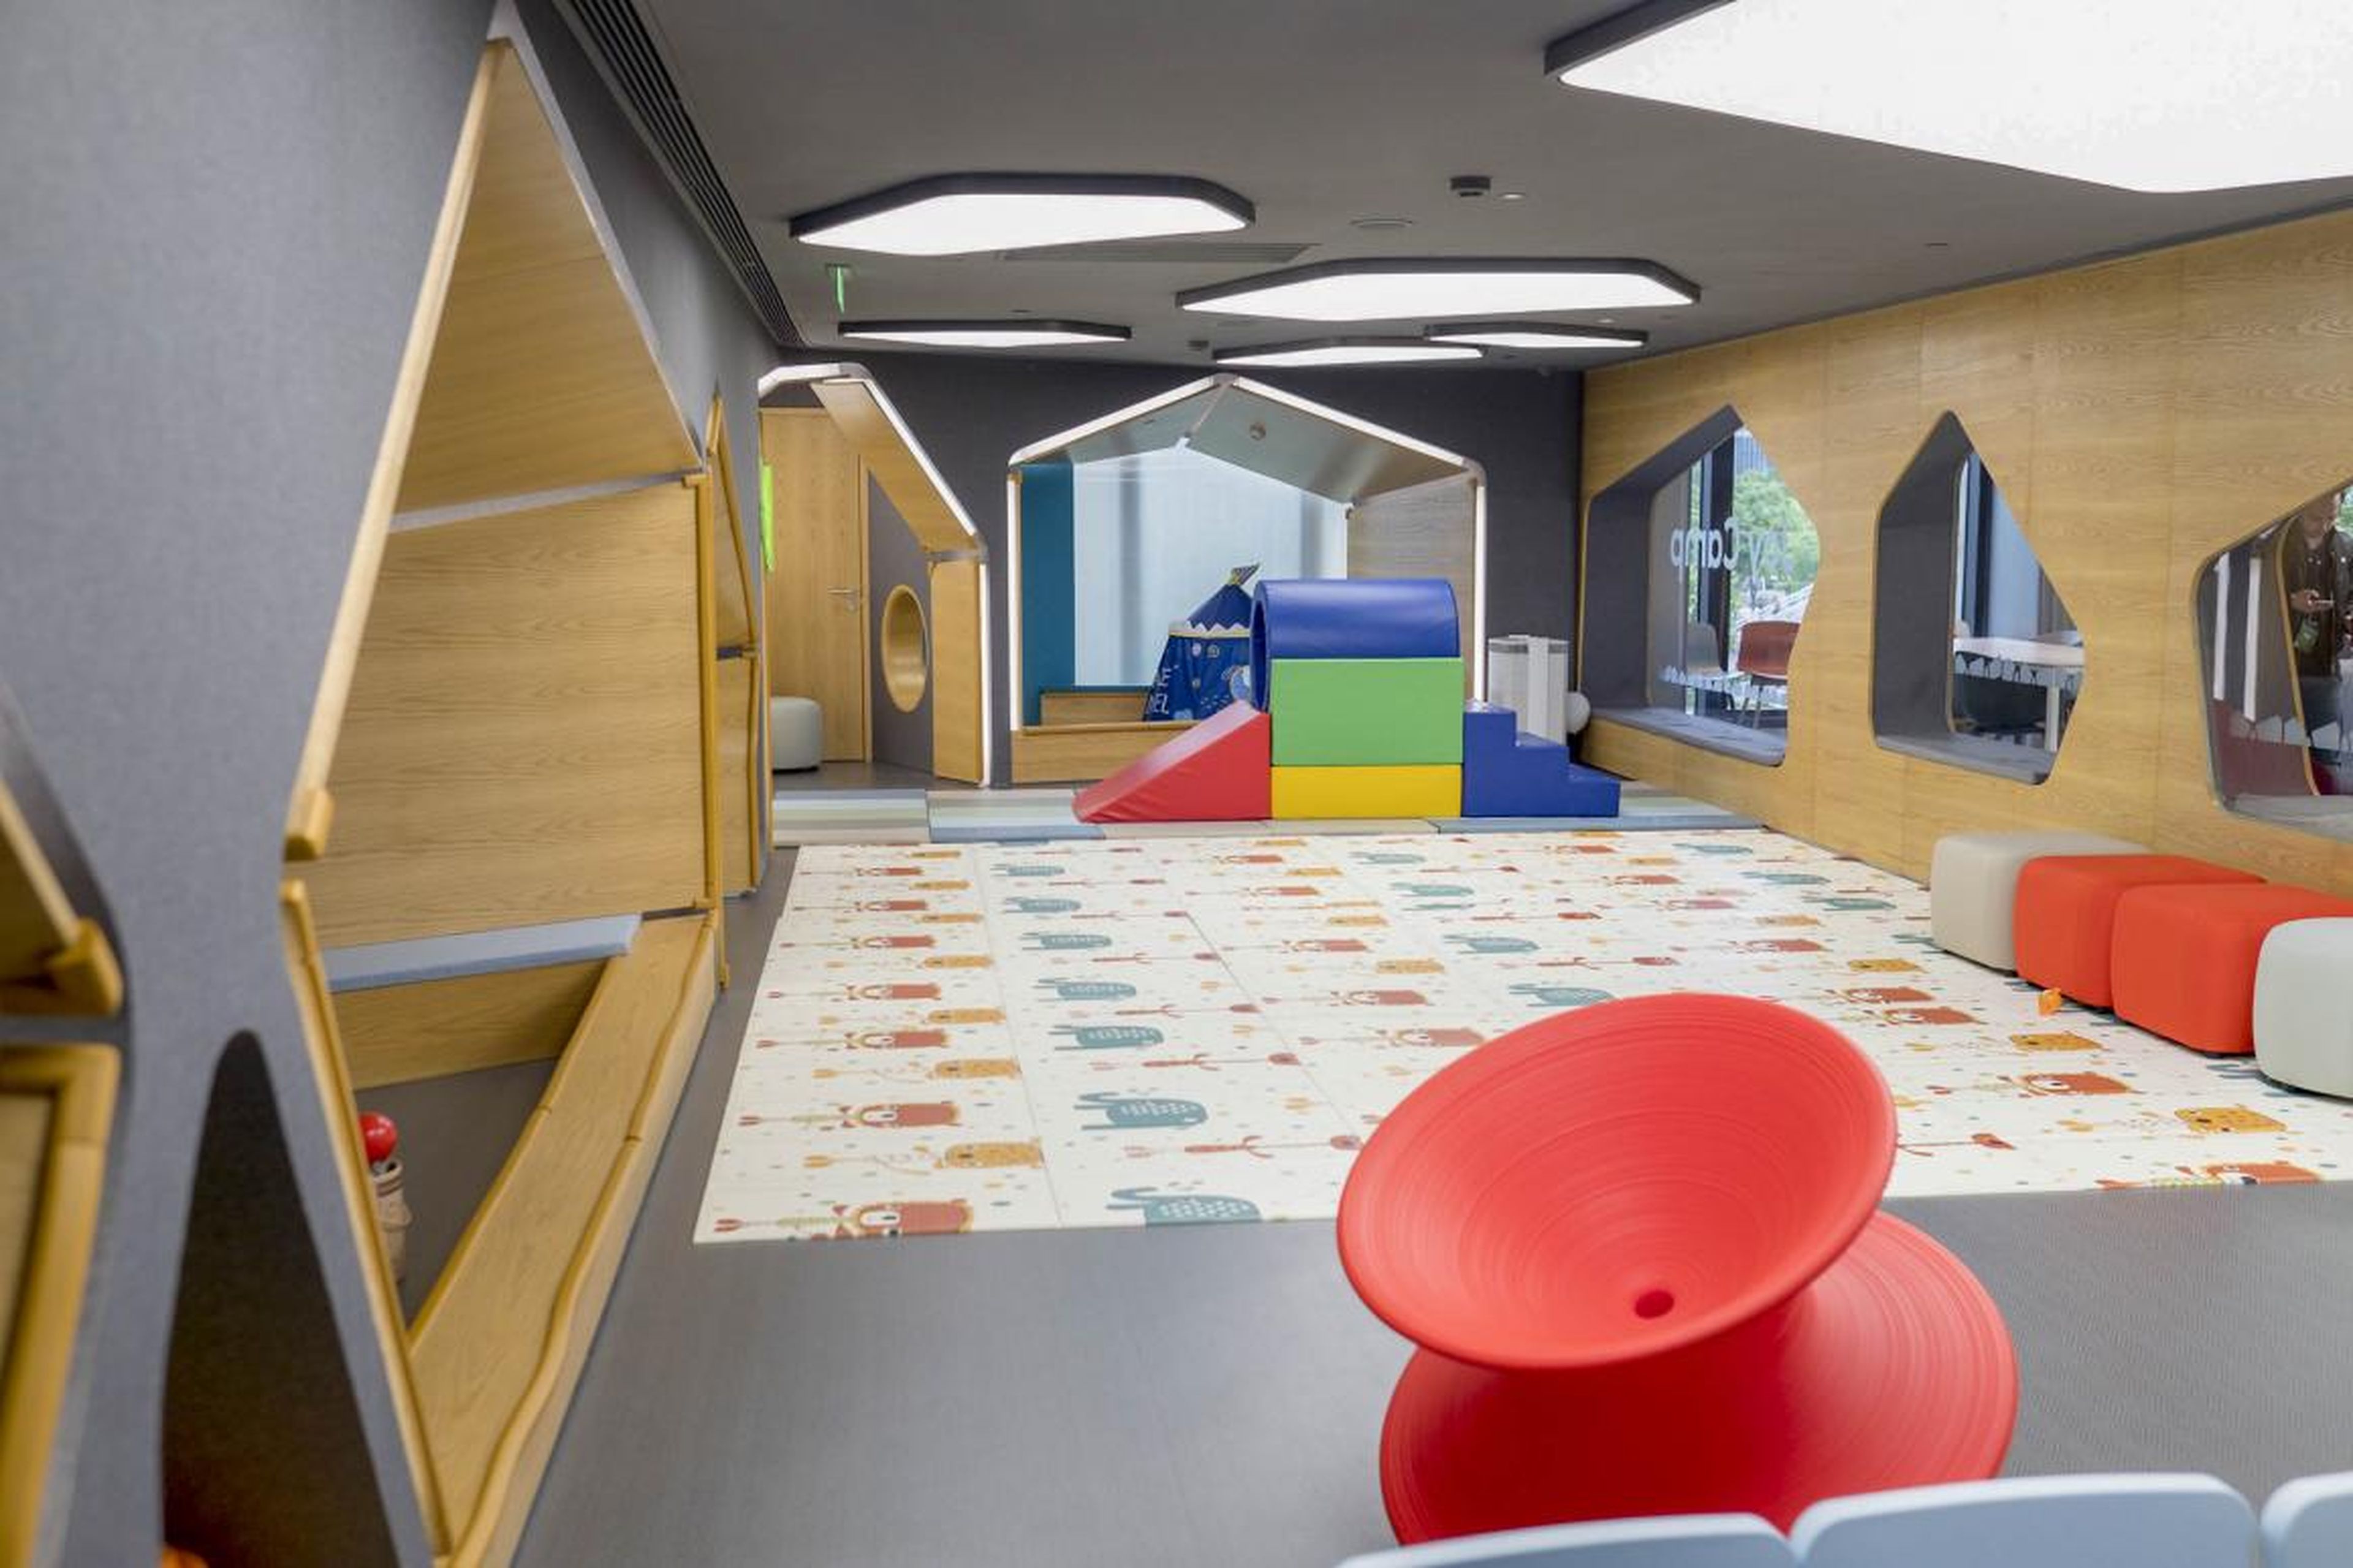 The Joy Camp is a supervised play area for children so that parents can drop them off and work in the Nio House undisturbed or even go shopping nearby.